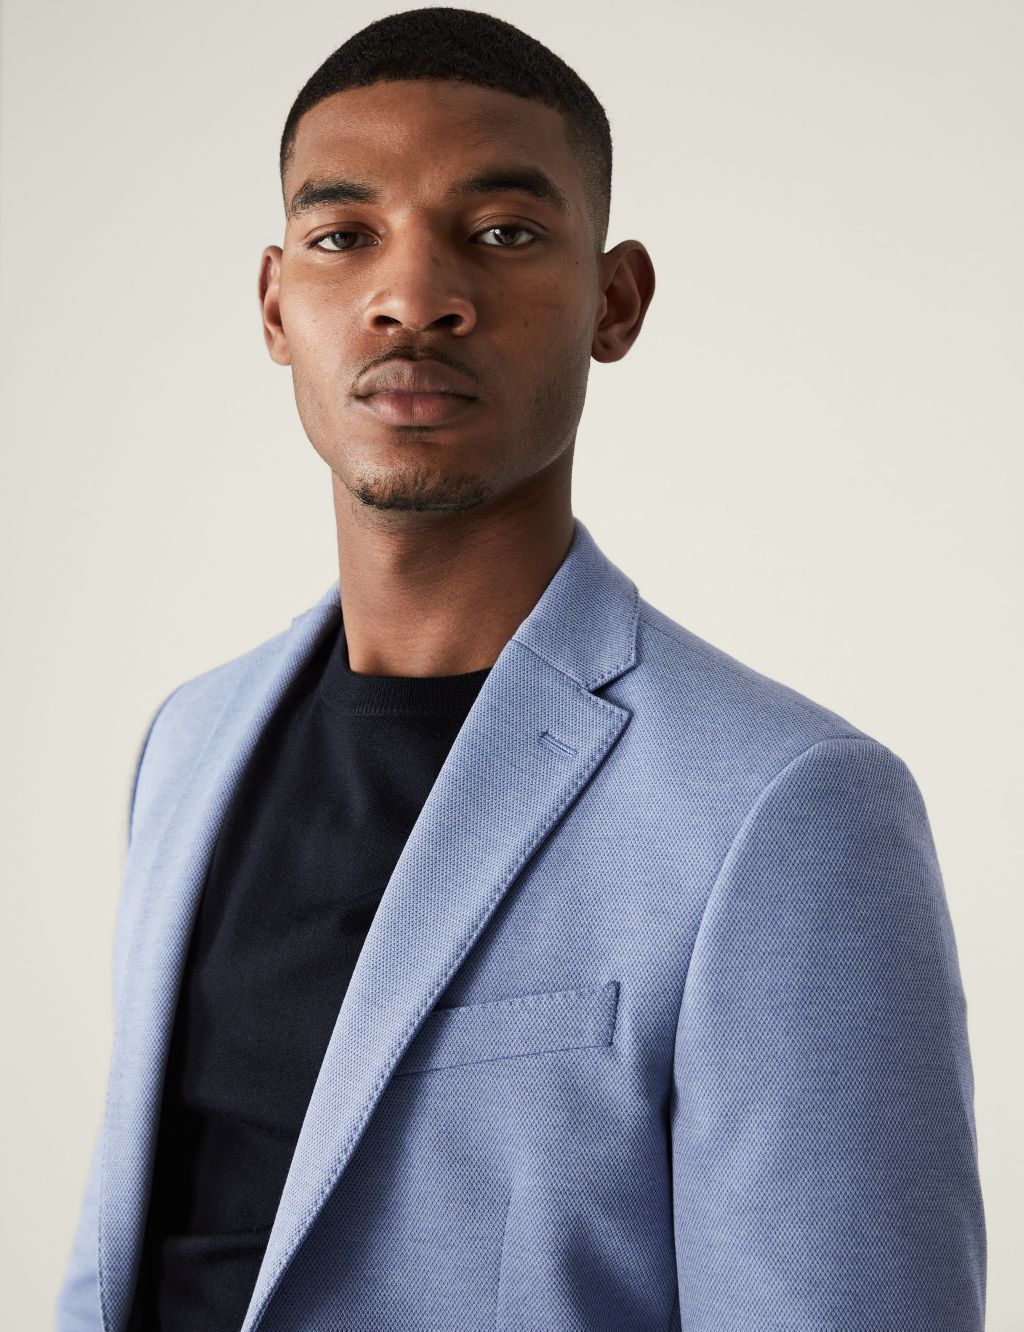 Textured Jersey Jacket with Stretch image 3